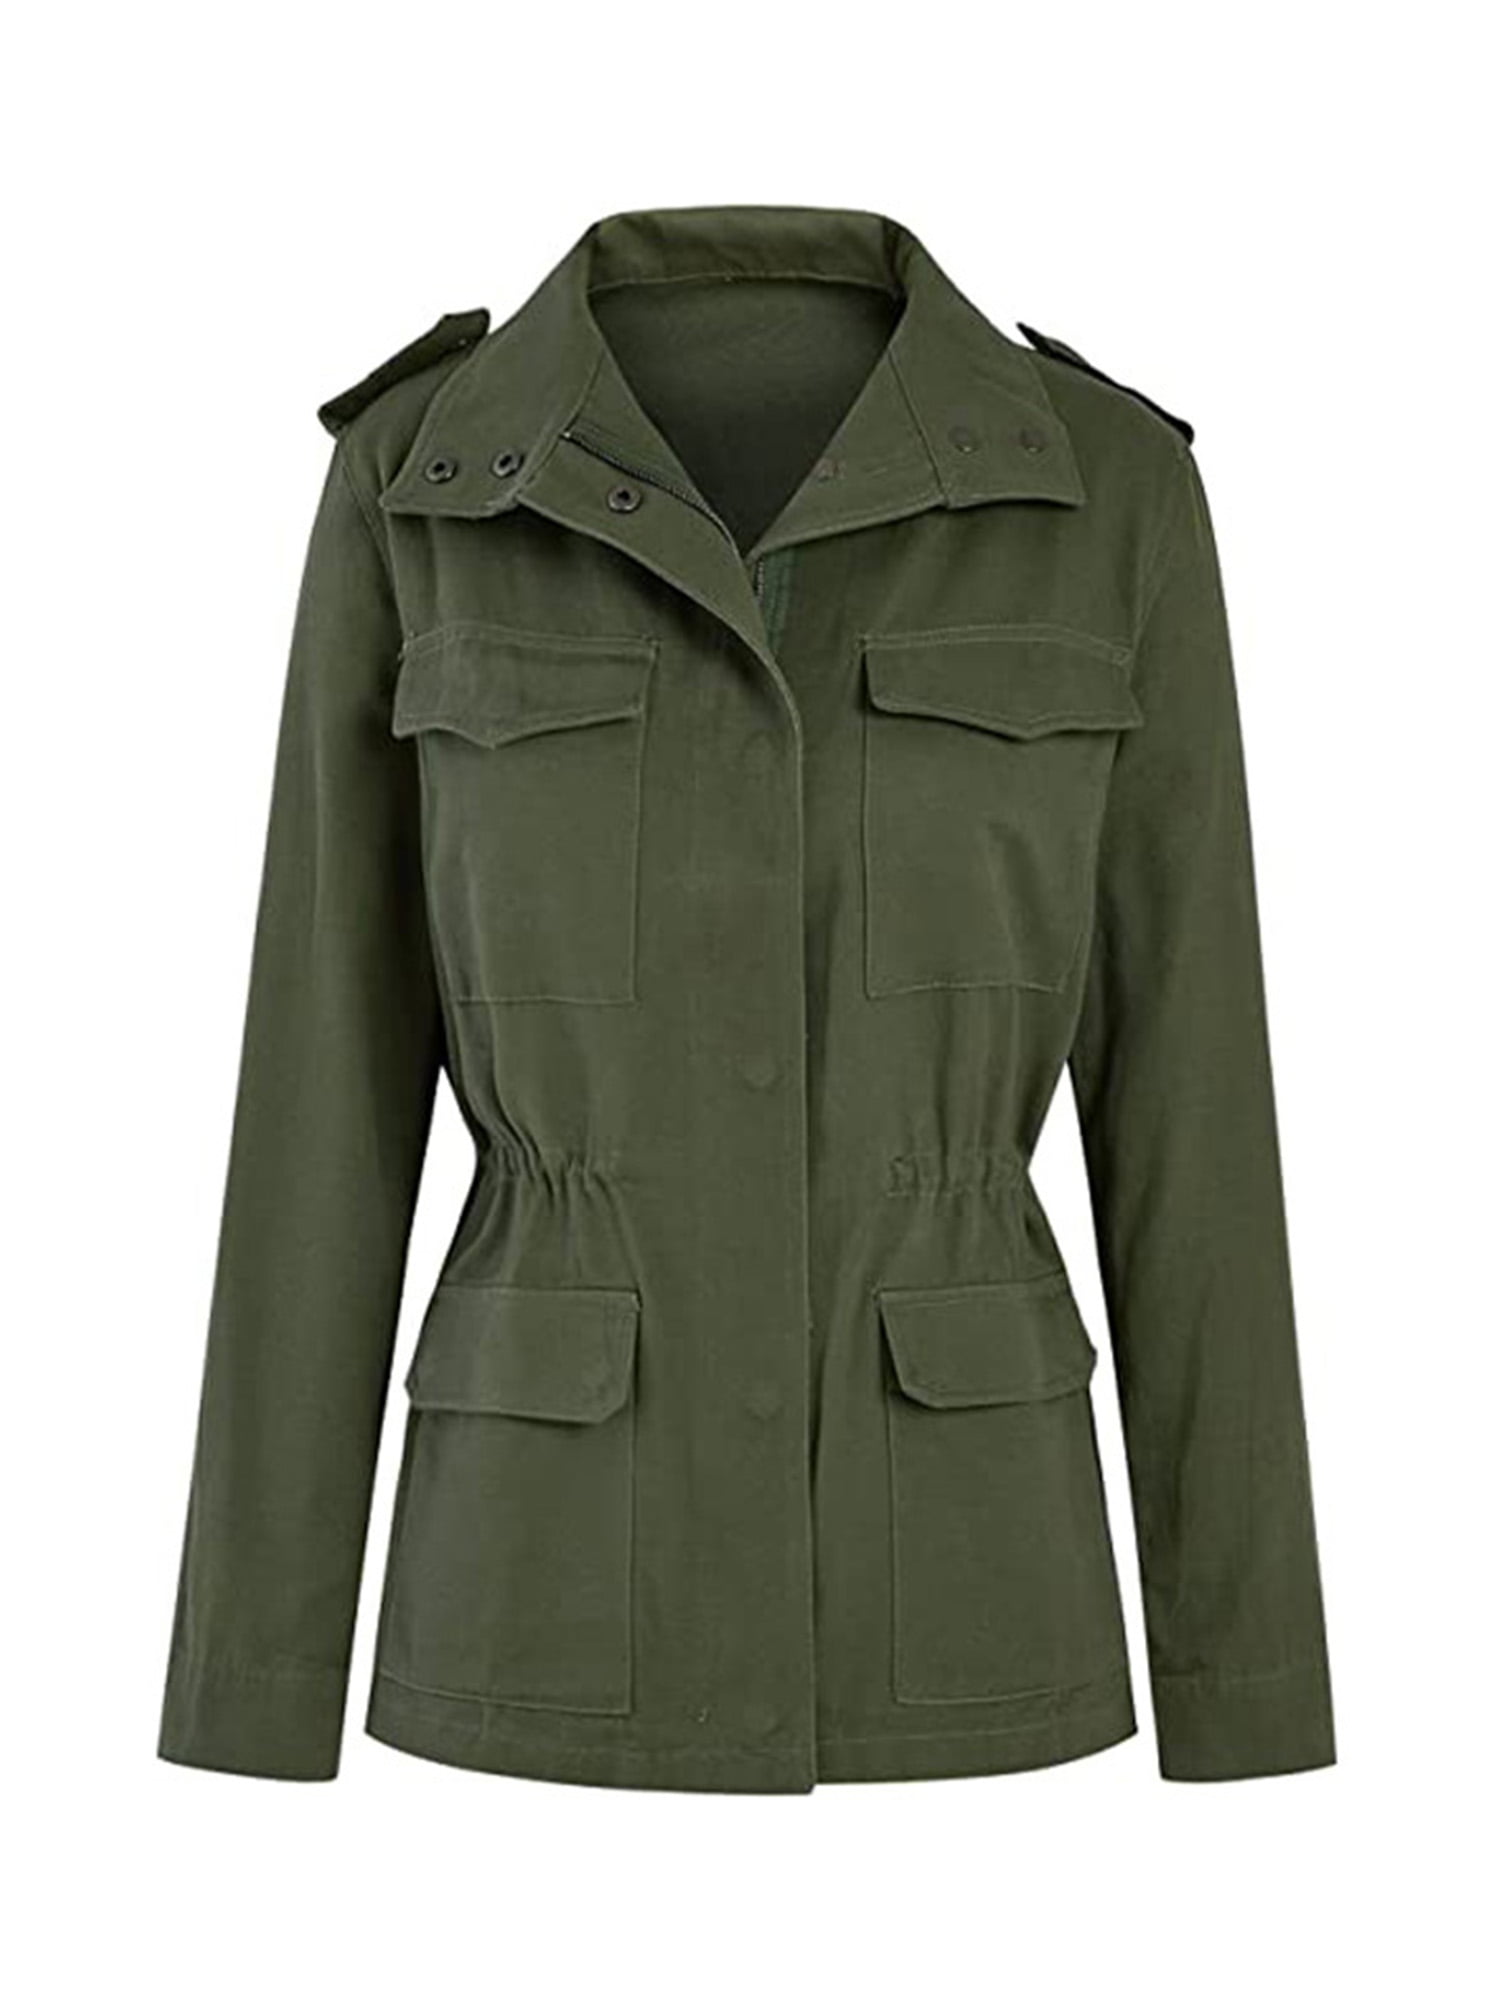 WenVen Women's Fall Lightweight Cotton Military Jacket Casual Long Sleeve  Utility Coat (Army Green, M) - Walmart.com